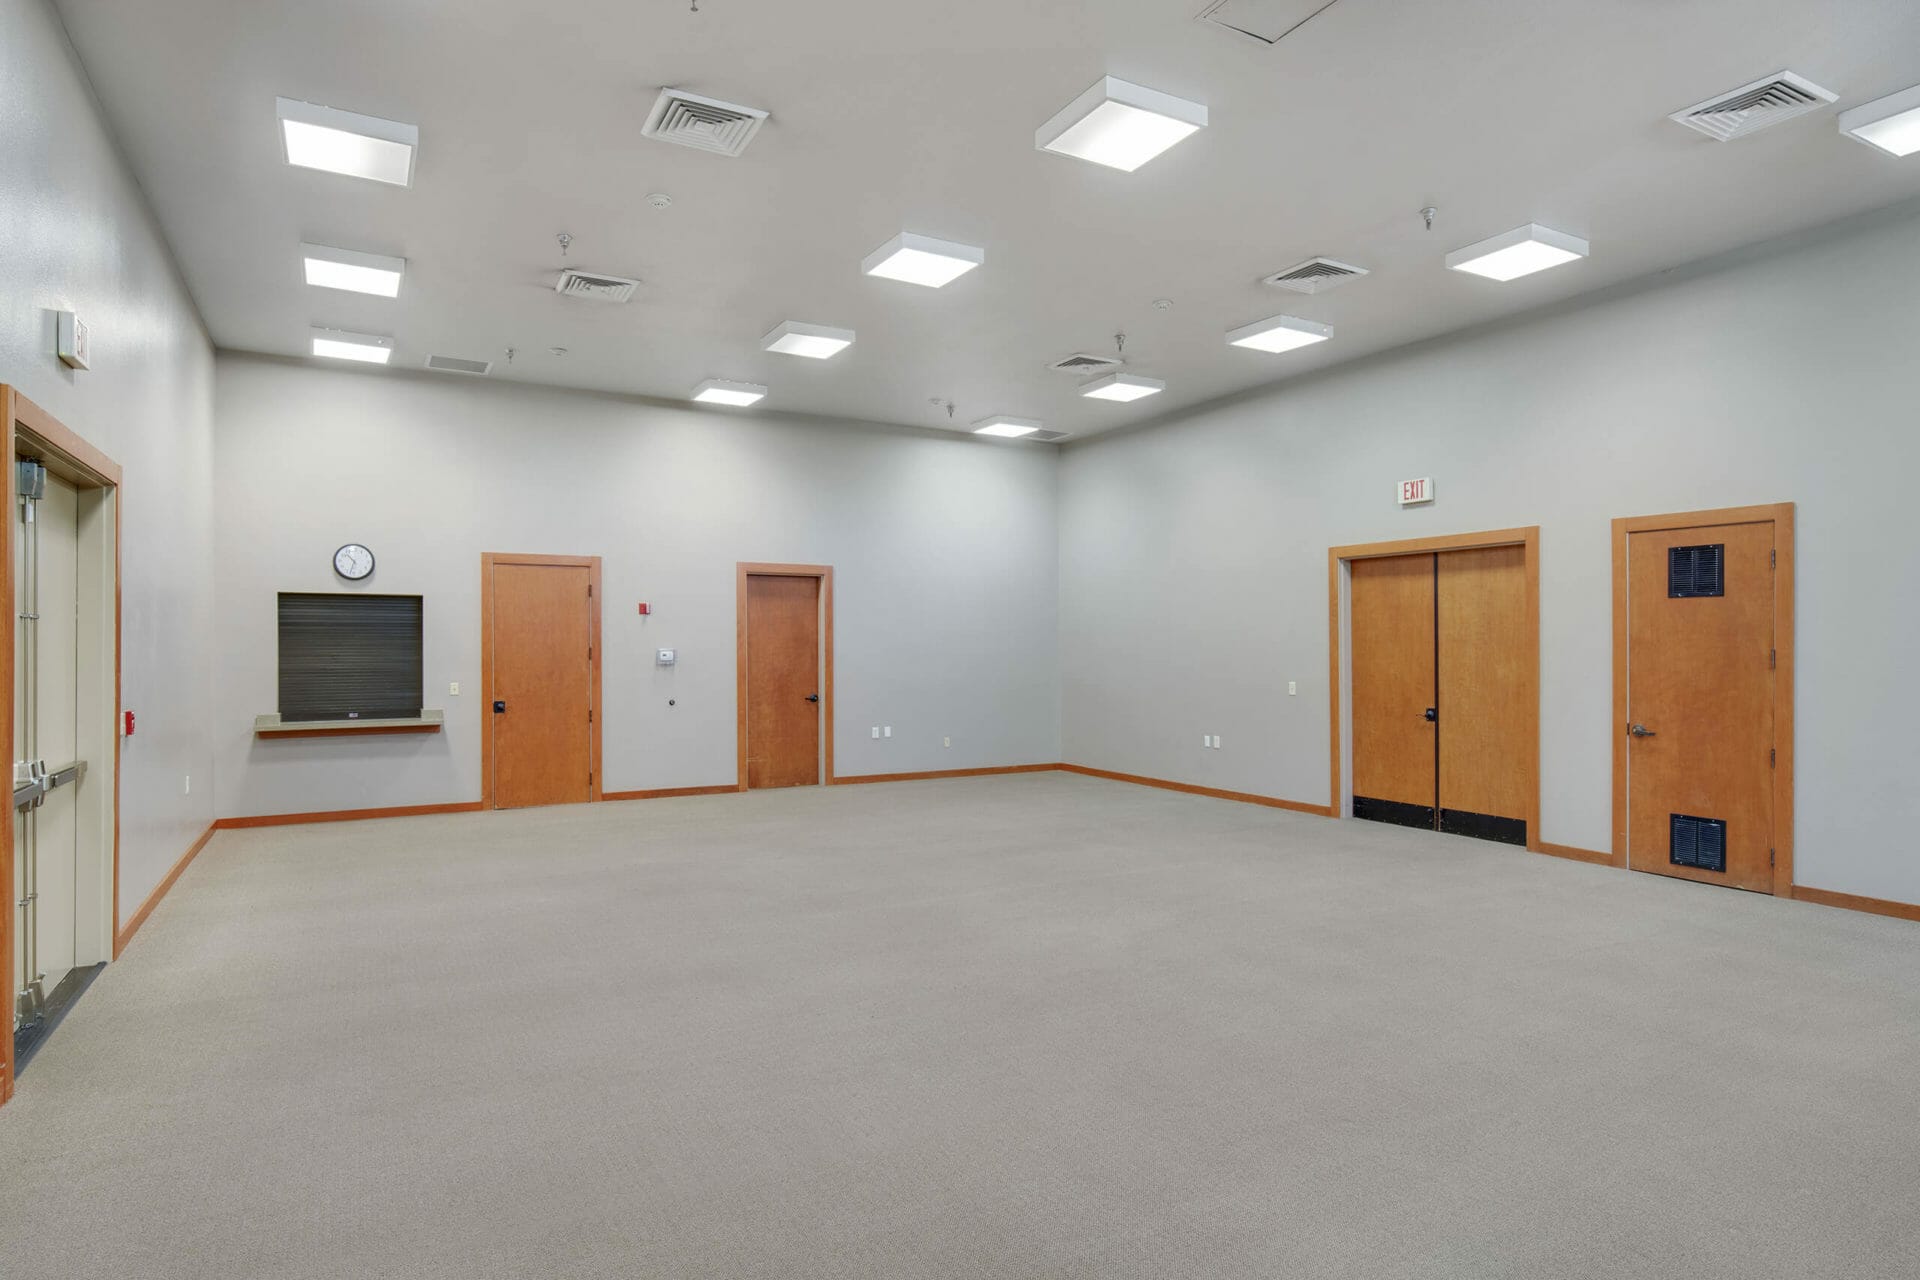 Meeting Room A - The Willows Community Center